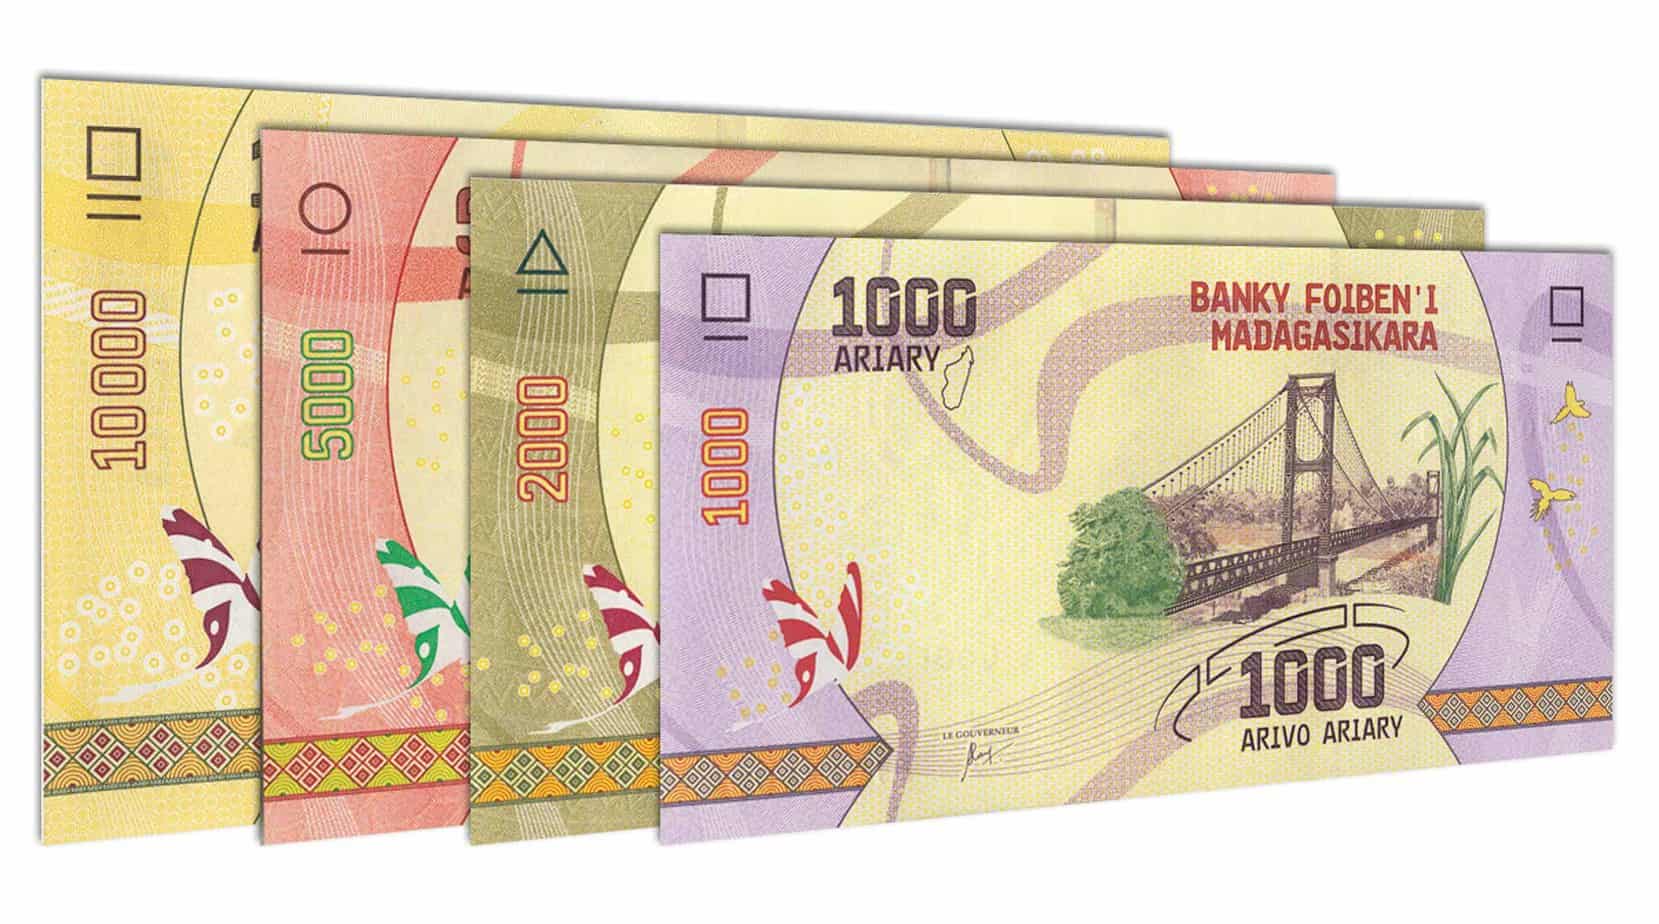 current magagascar bank notes - currency